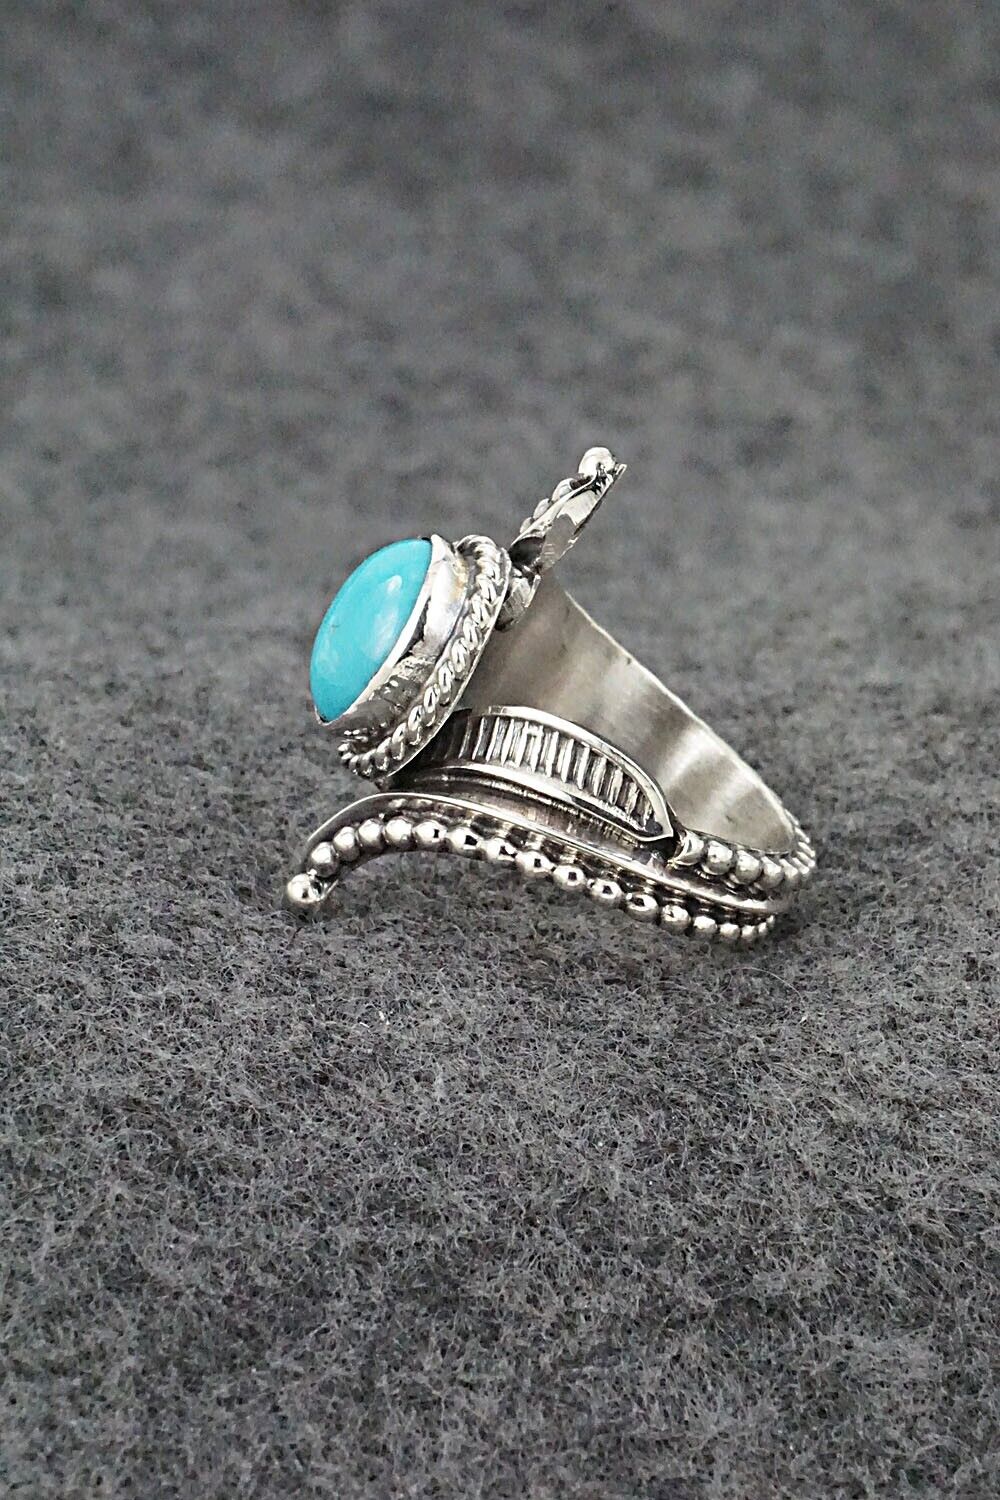 Turquoise & Sterling Silver Ring - Thomas Yazzie - Size 6